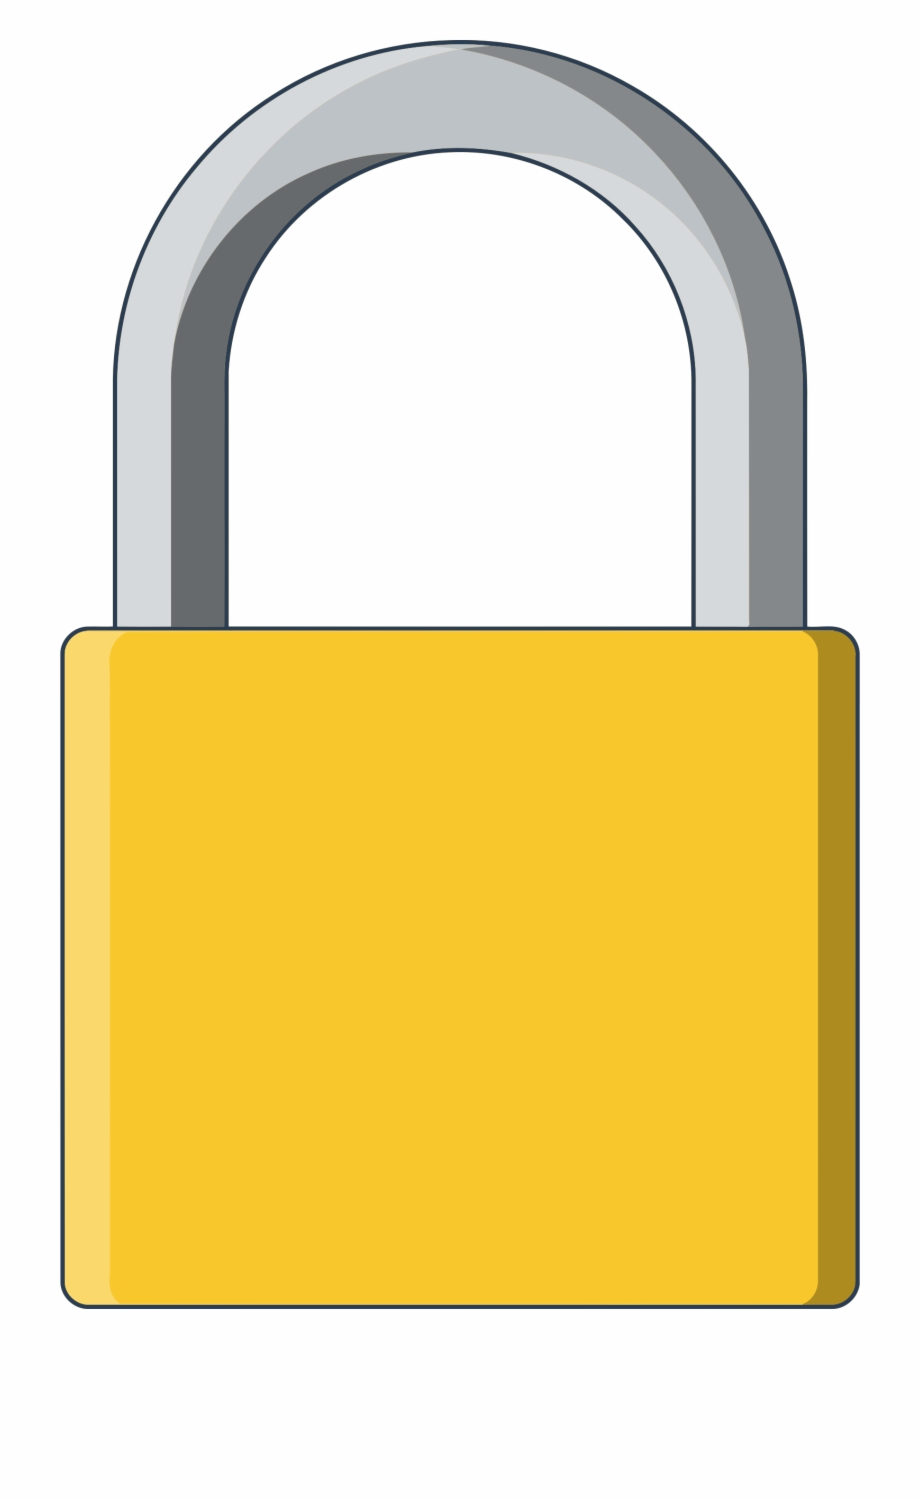 Png Royalty Free Library Key Lock Clipart.